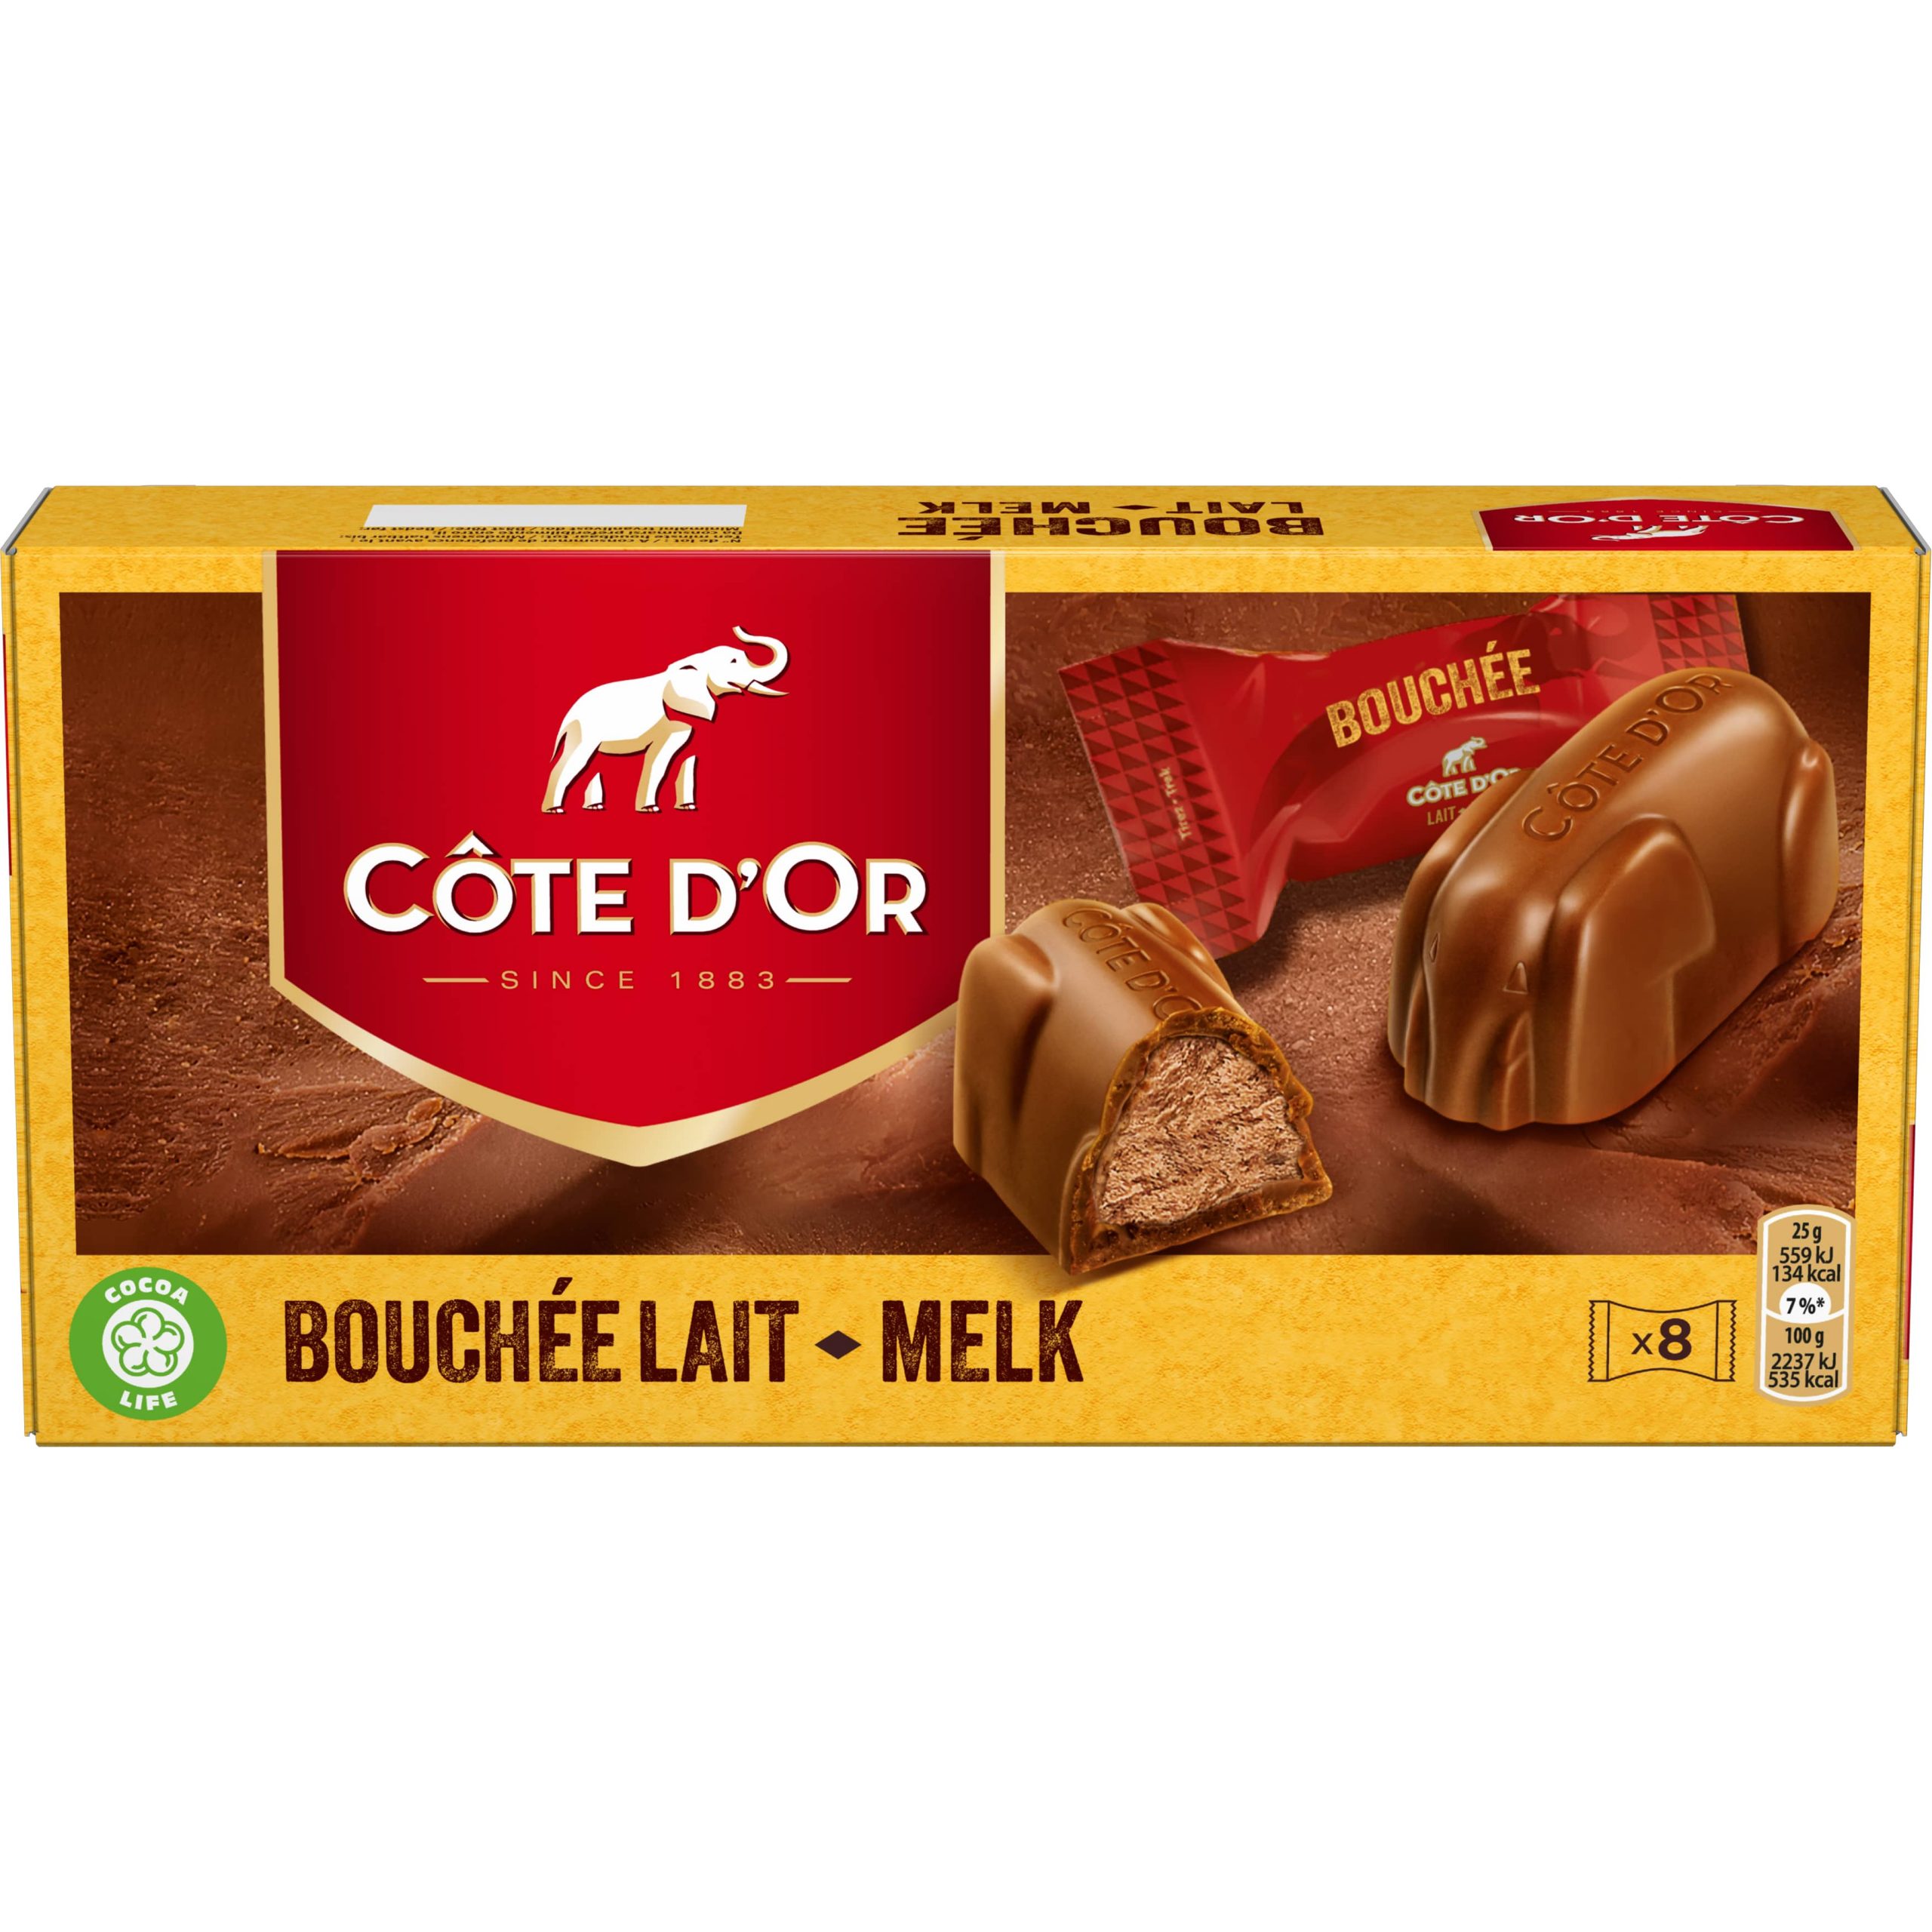 Côte d'Or Bouchée Milk Chocolate with Praline Filling